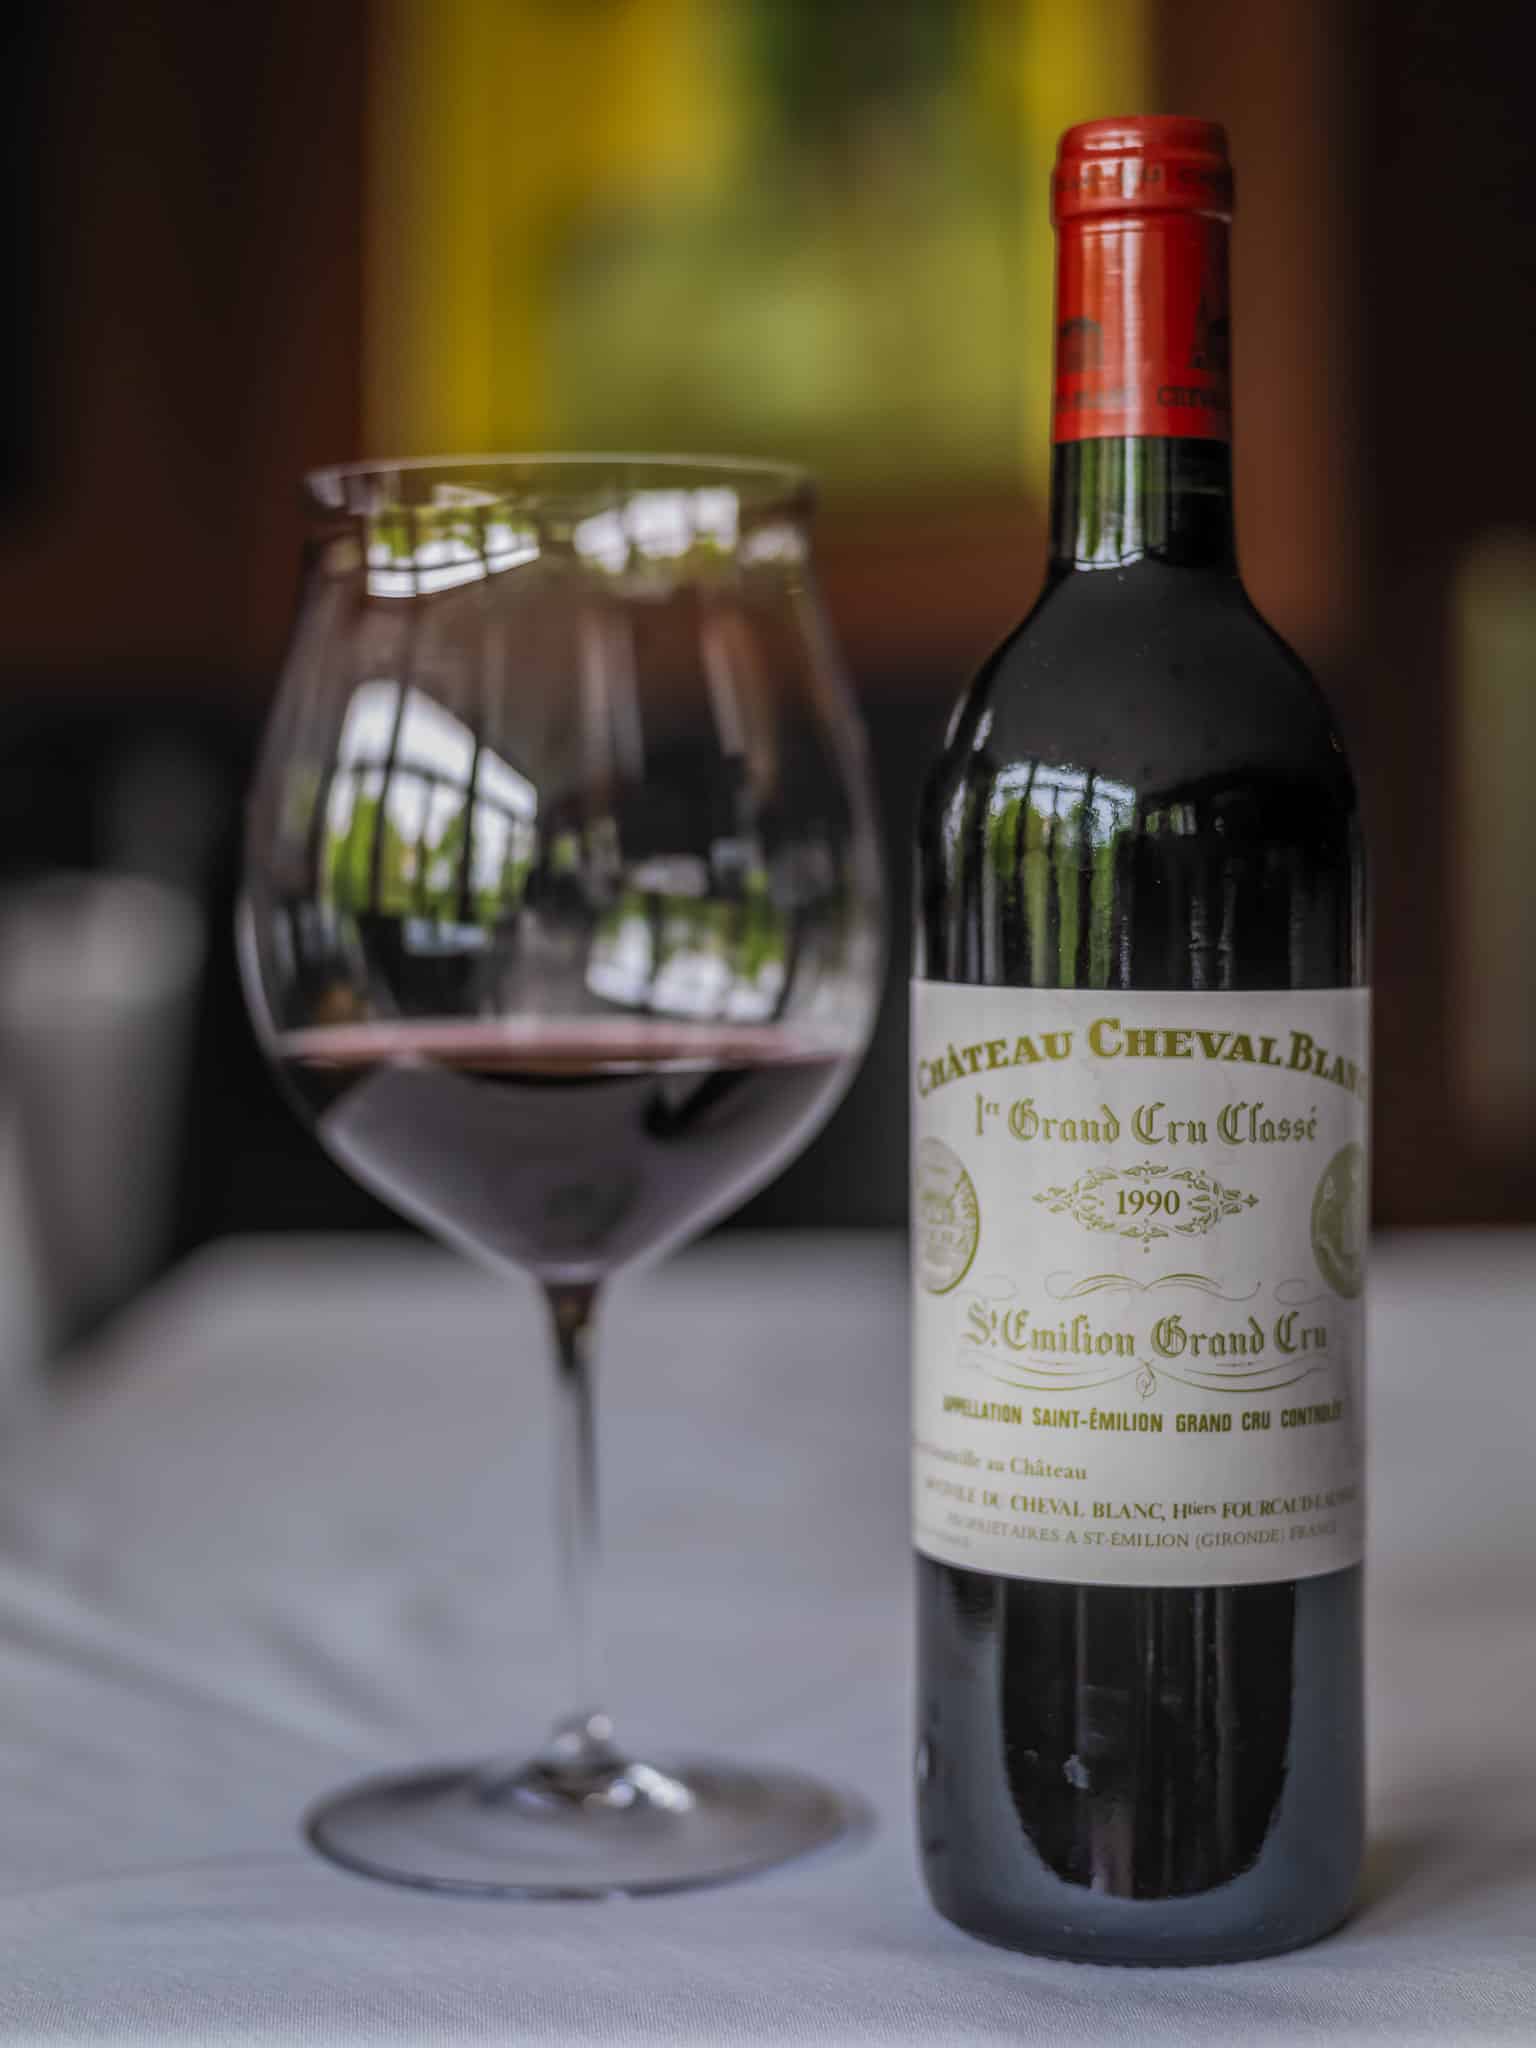 1990 Chateau Cheval Blanc at Troquet | photo credit: Dale Cruse via Flickr